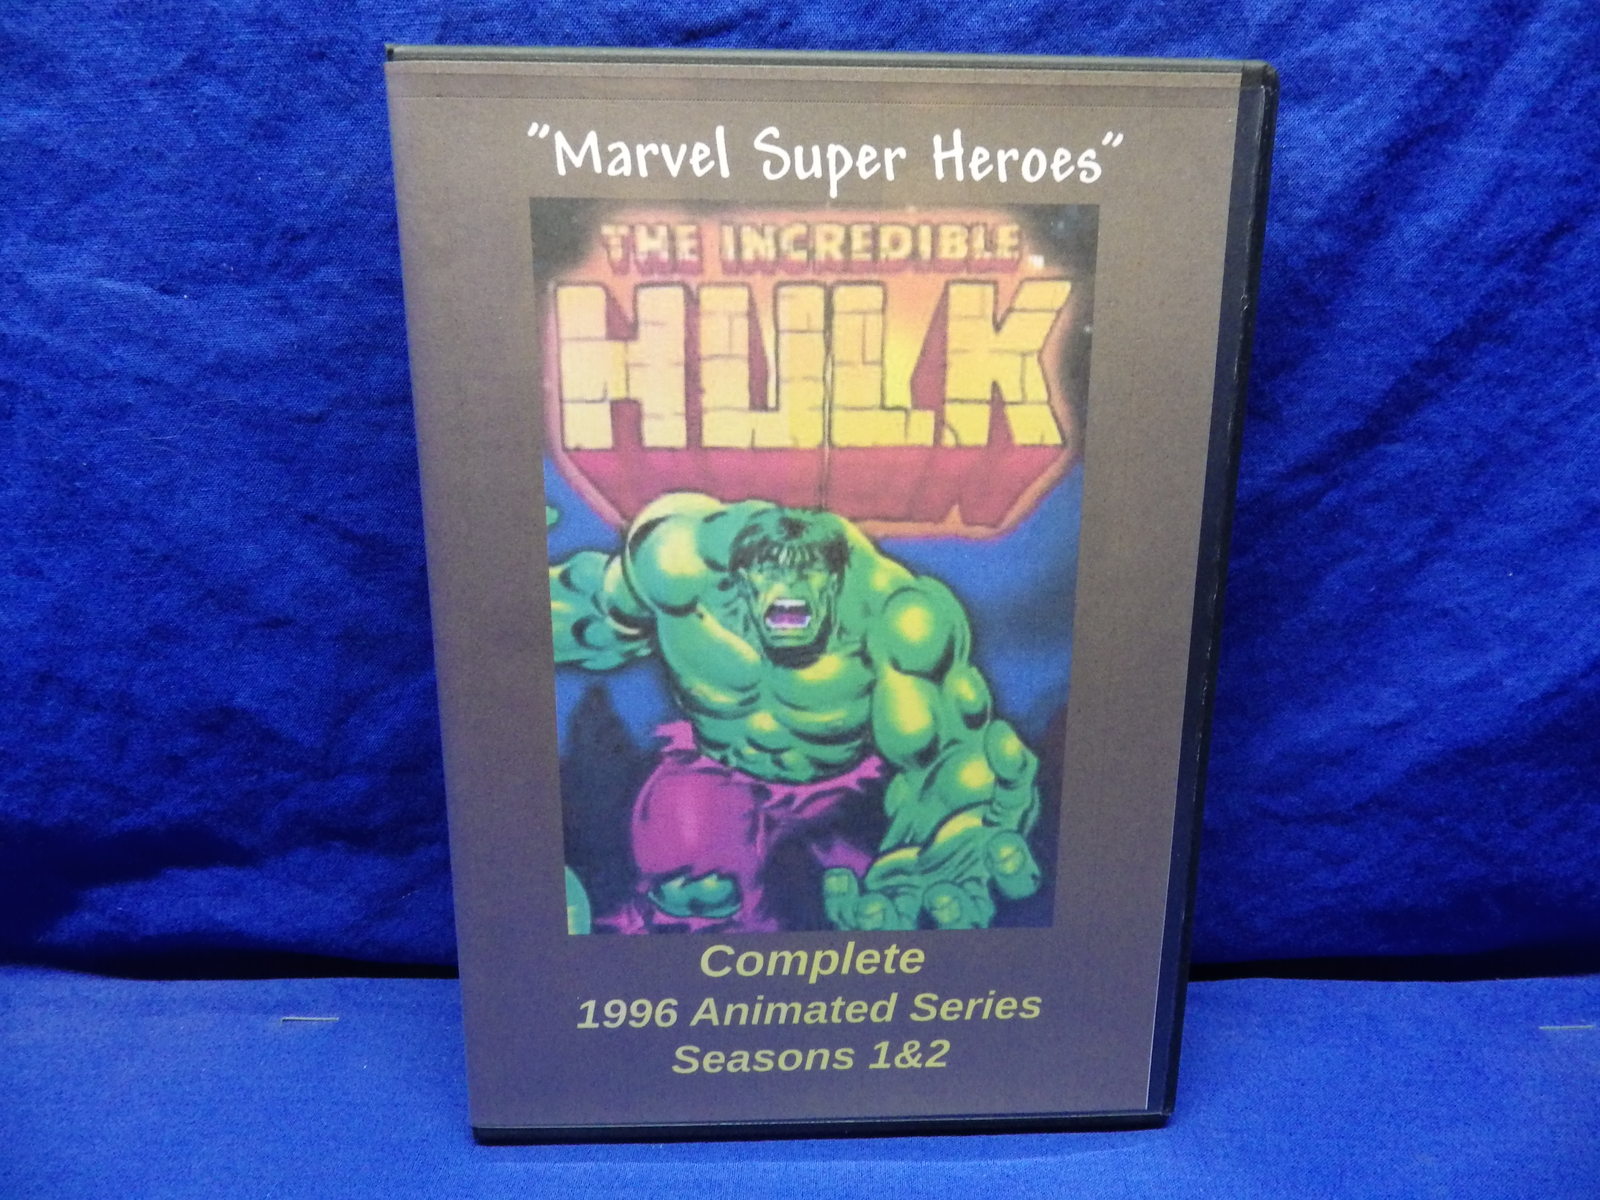 Primary image for  Marvel Super Heroes TV Series Complete Incredible Hulk (1996) Episodes 1-21 